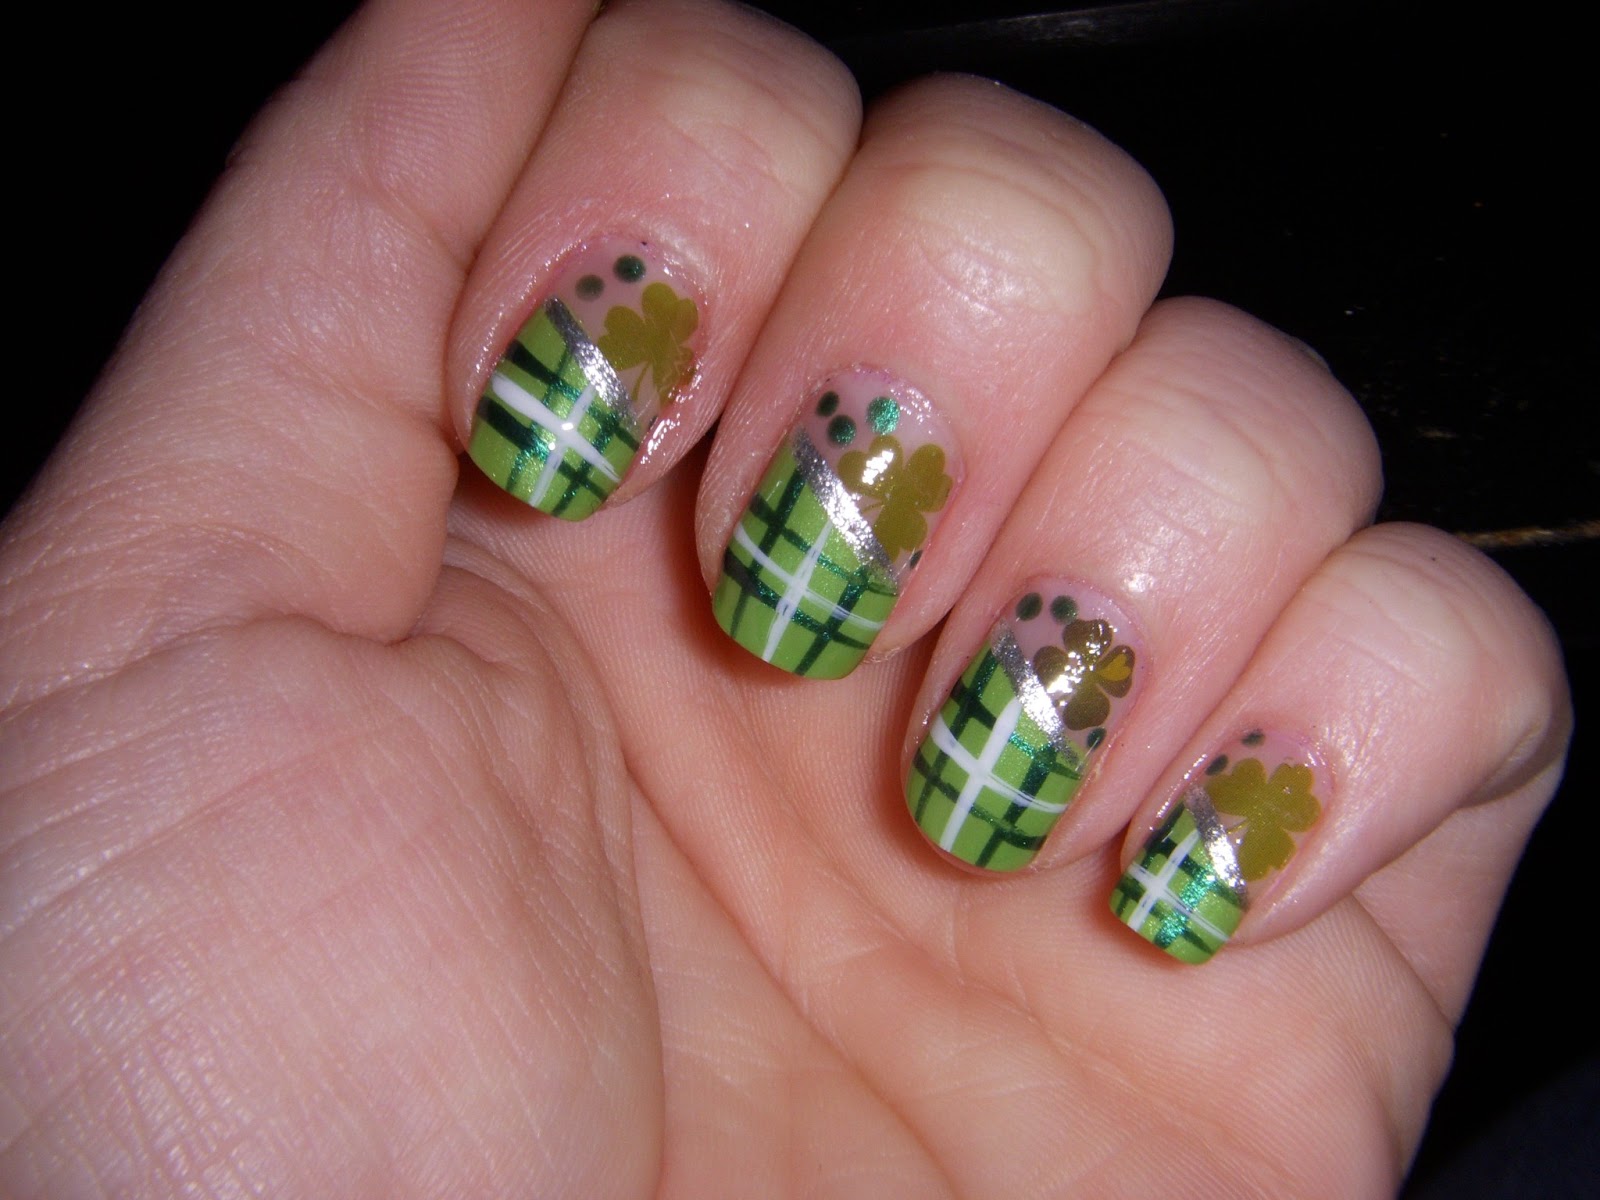 Nail Therapy: St Patty's Day nails